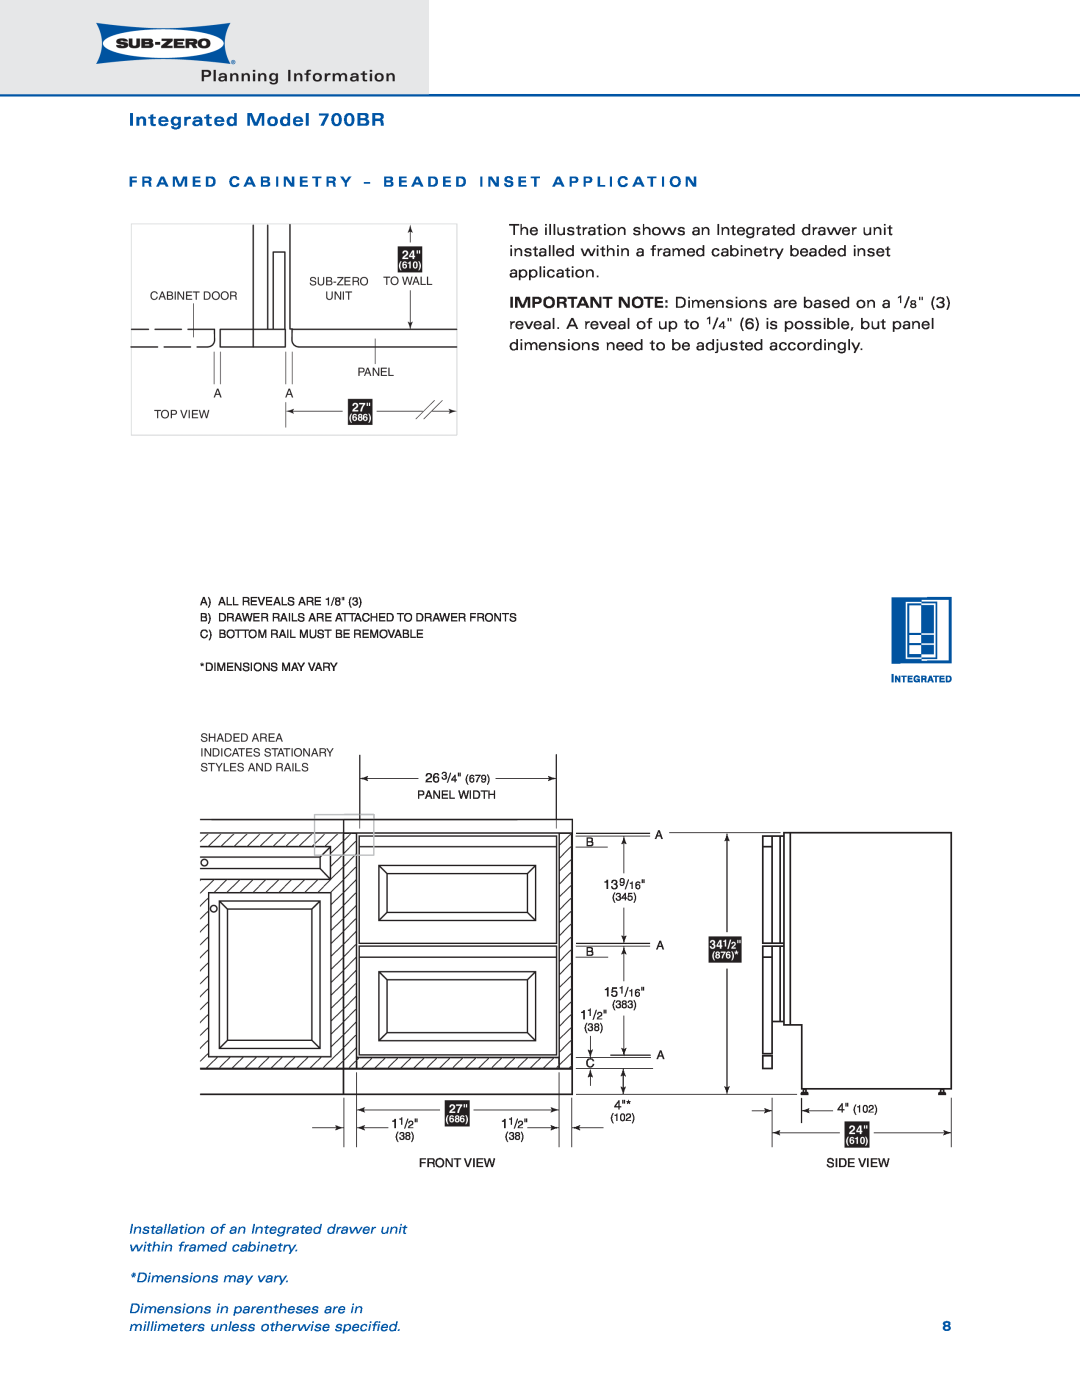 Sub-Zero dimensions Integrated Model 700BR, Planning Information, To Wall, 263/4, Panel Width 